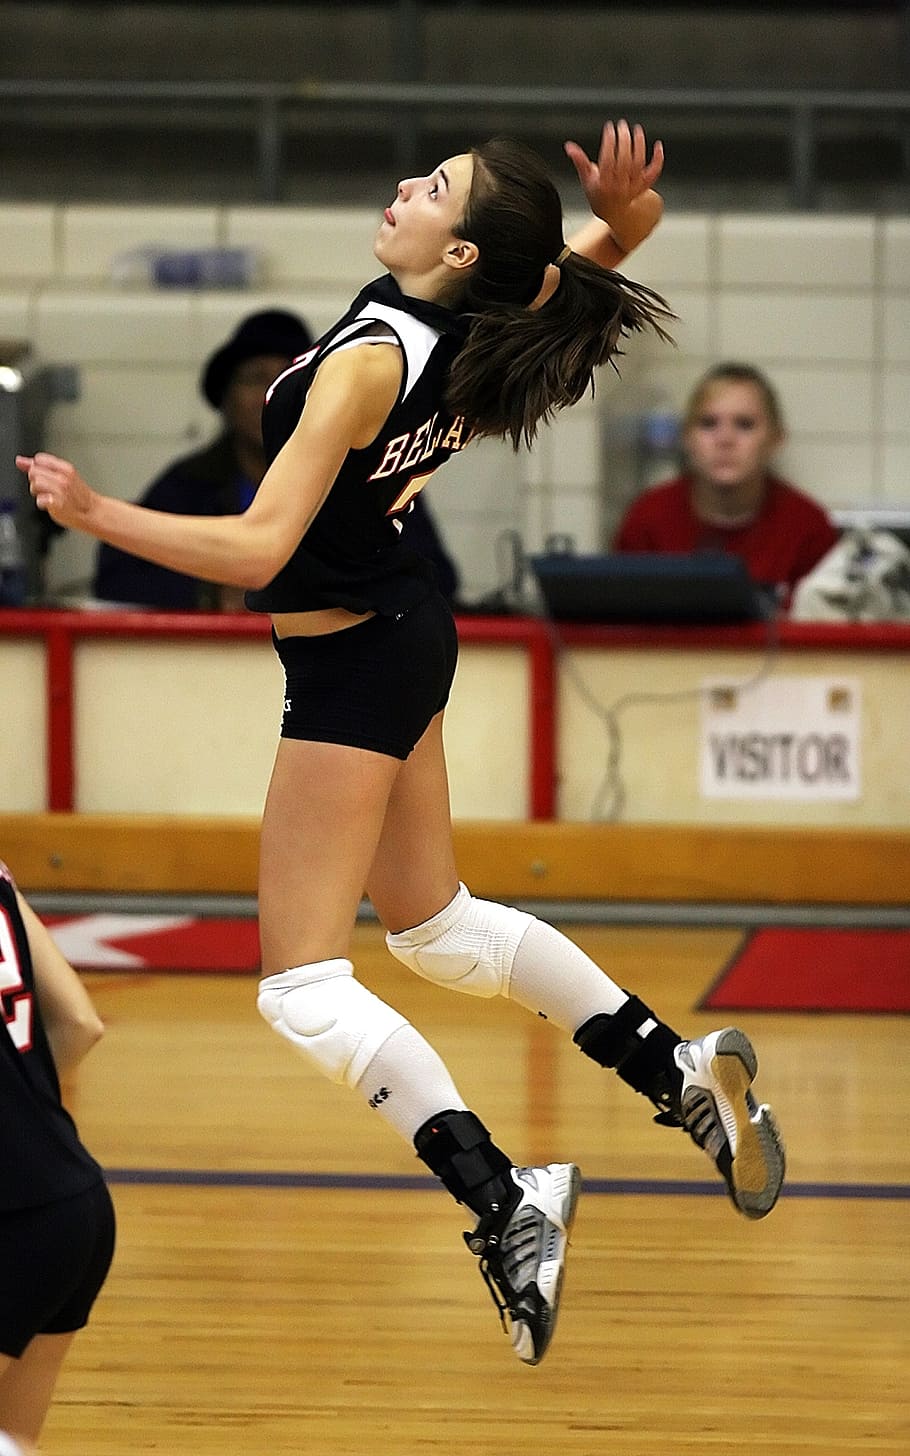 volleyball player spiking position, volleyball, player, spike, athlete, volley, game, sport, athletic, fitness